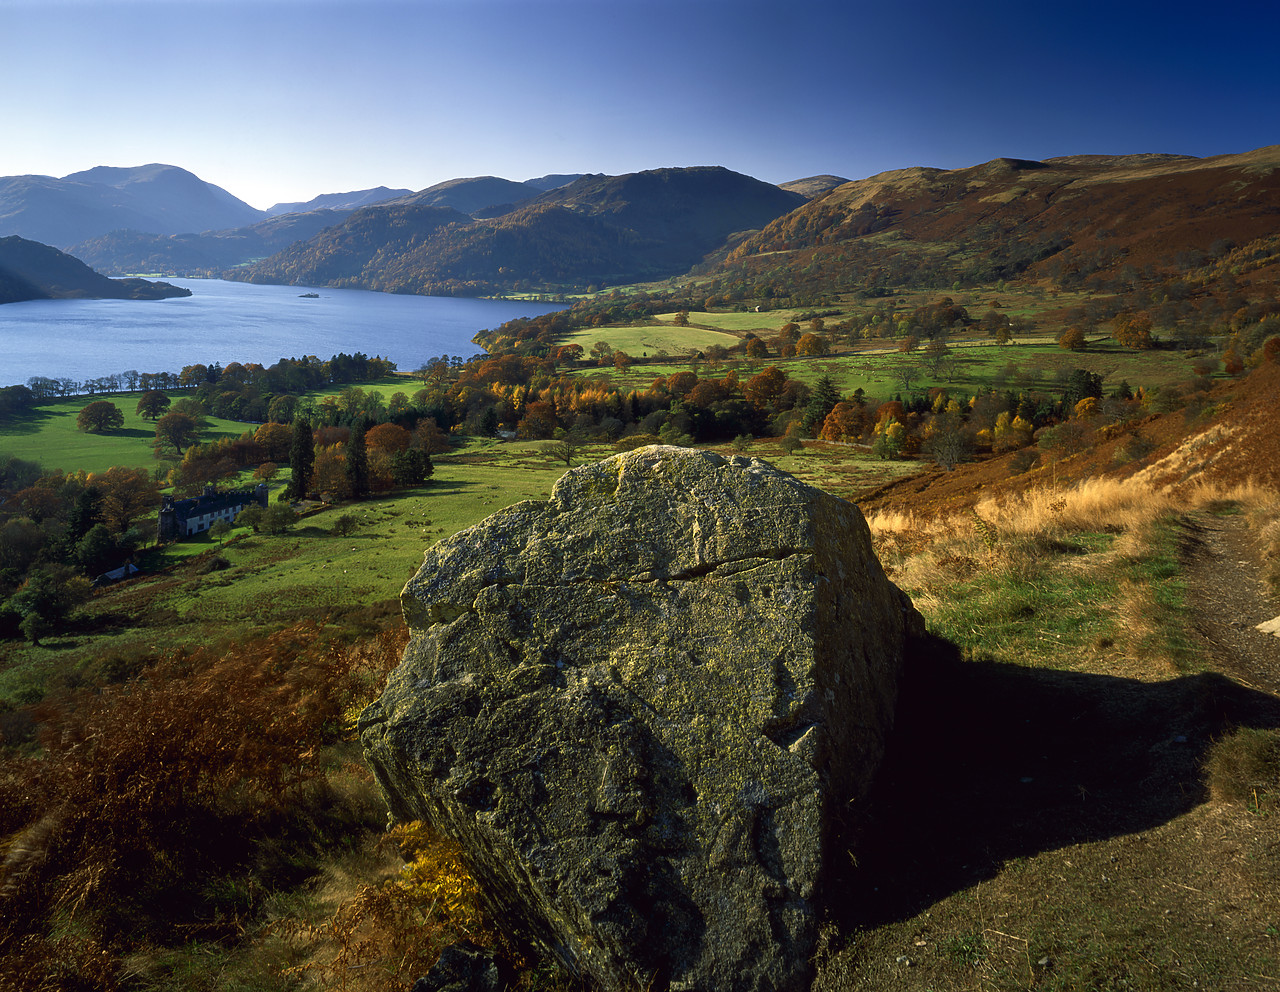 #030399-2 - Ullswater from Gowbarrow, Lake District National Park, Cumbria, England